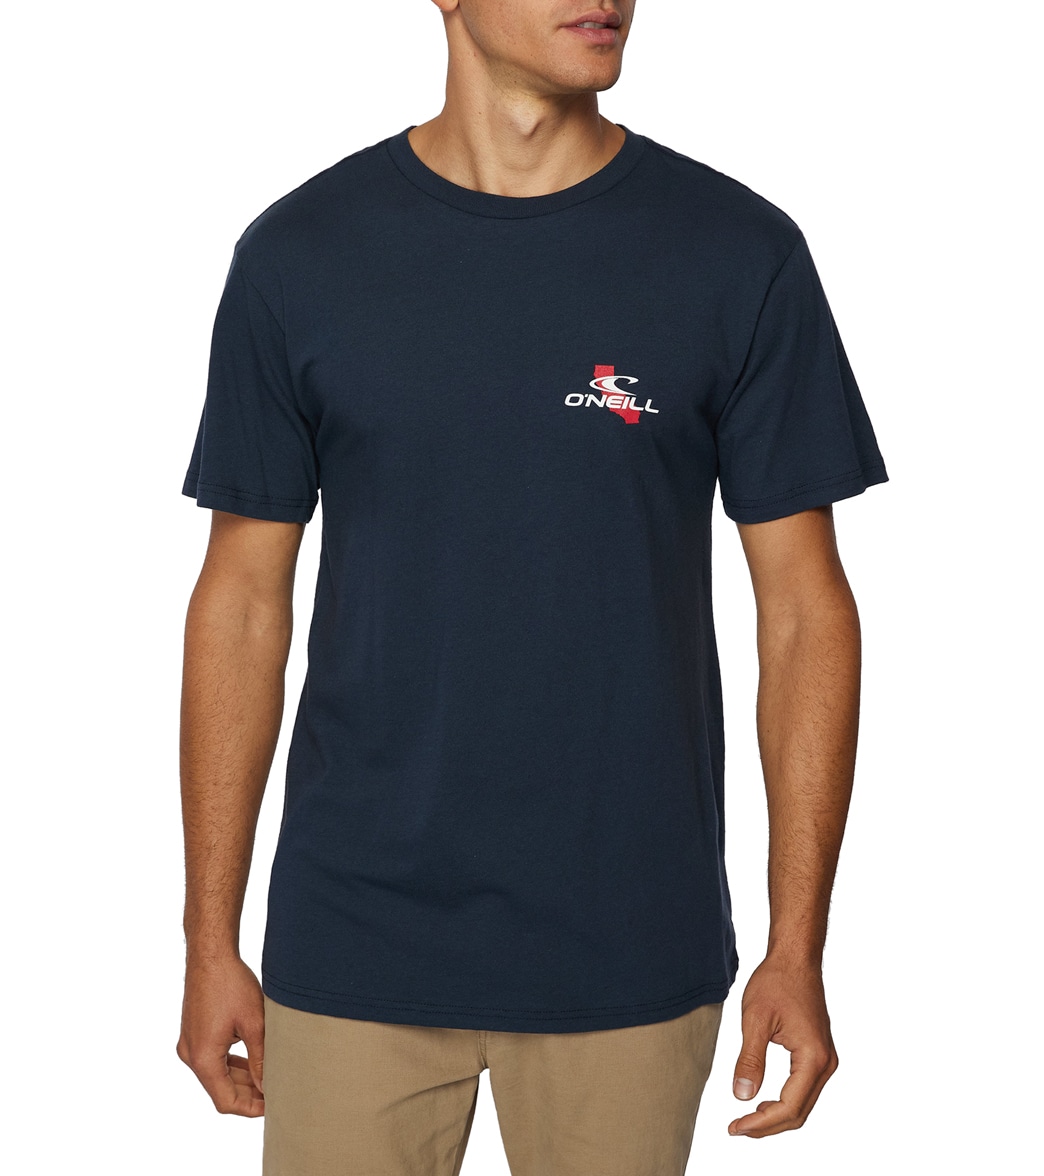 O'neill Men's Cali Marquee 2 Short Sleeve Tee Shirt - New Navy Large Cotton - Swimoutlet.com